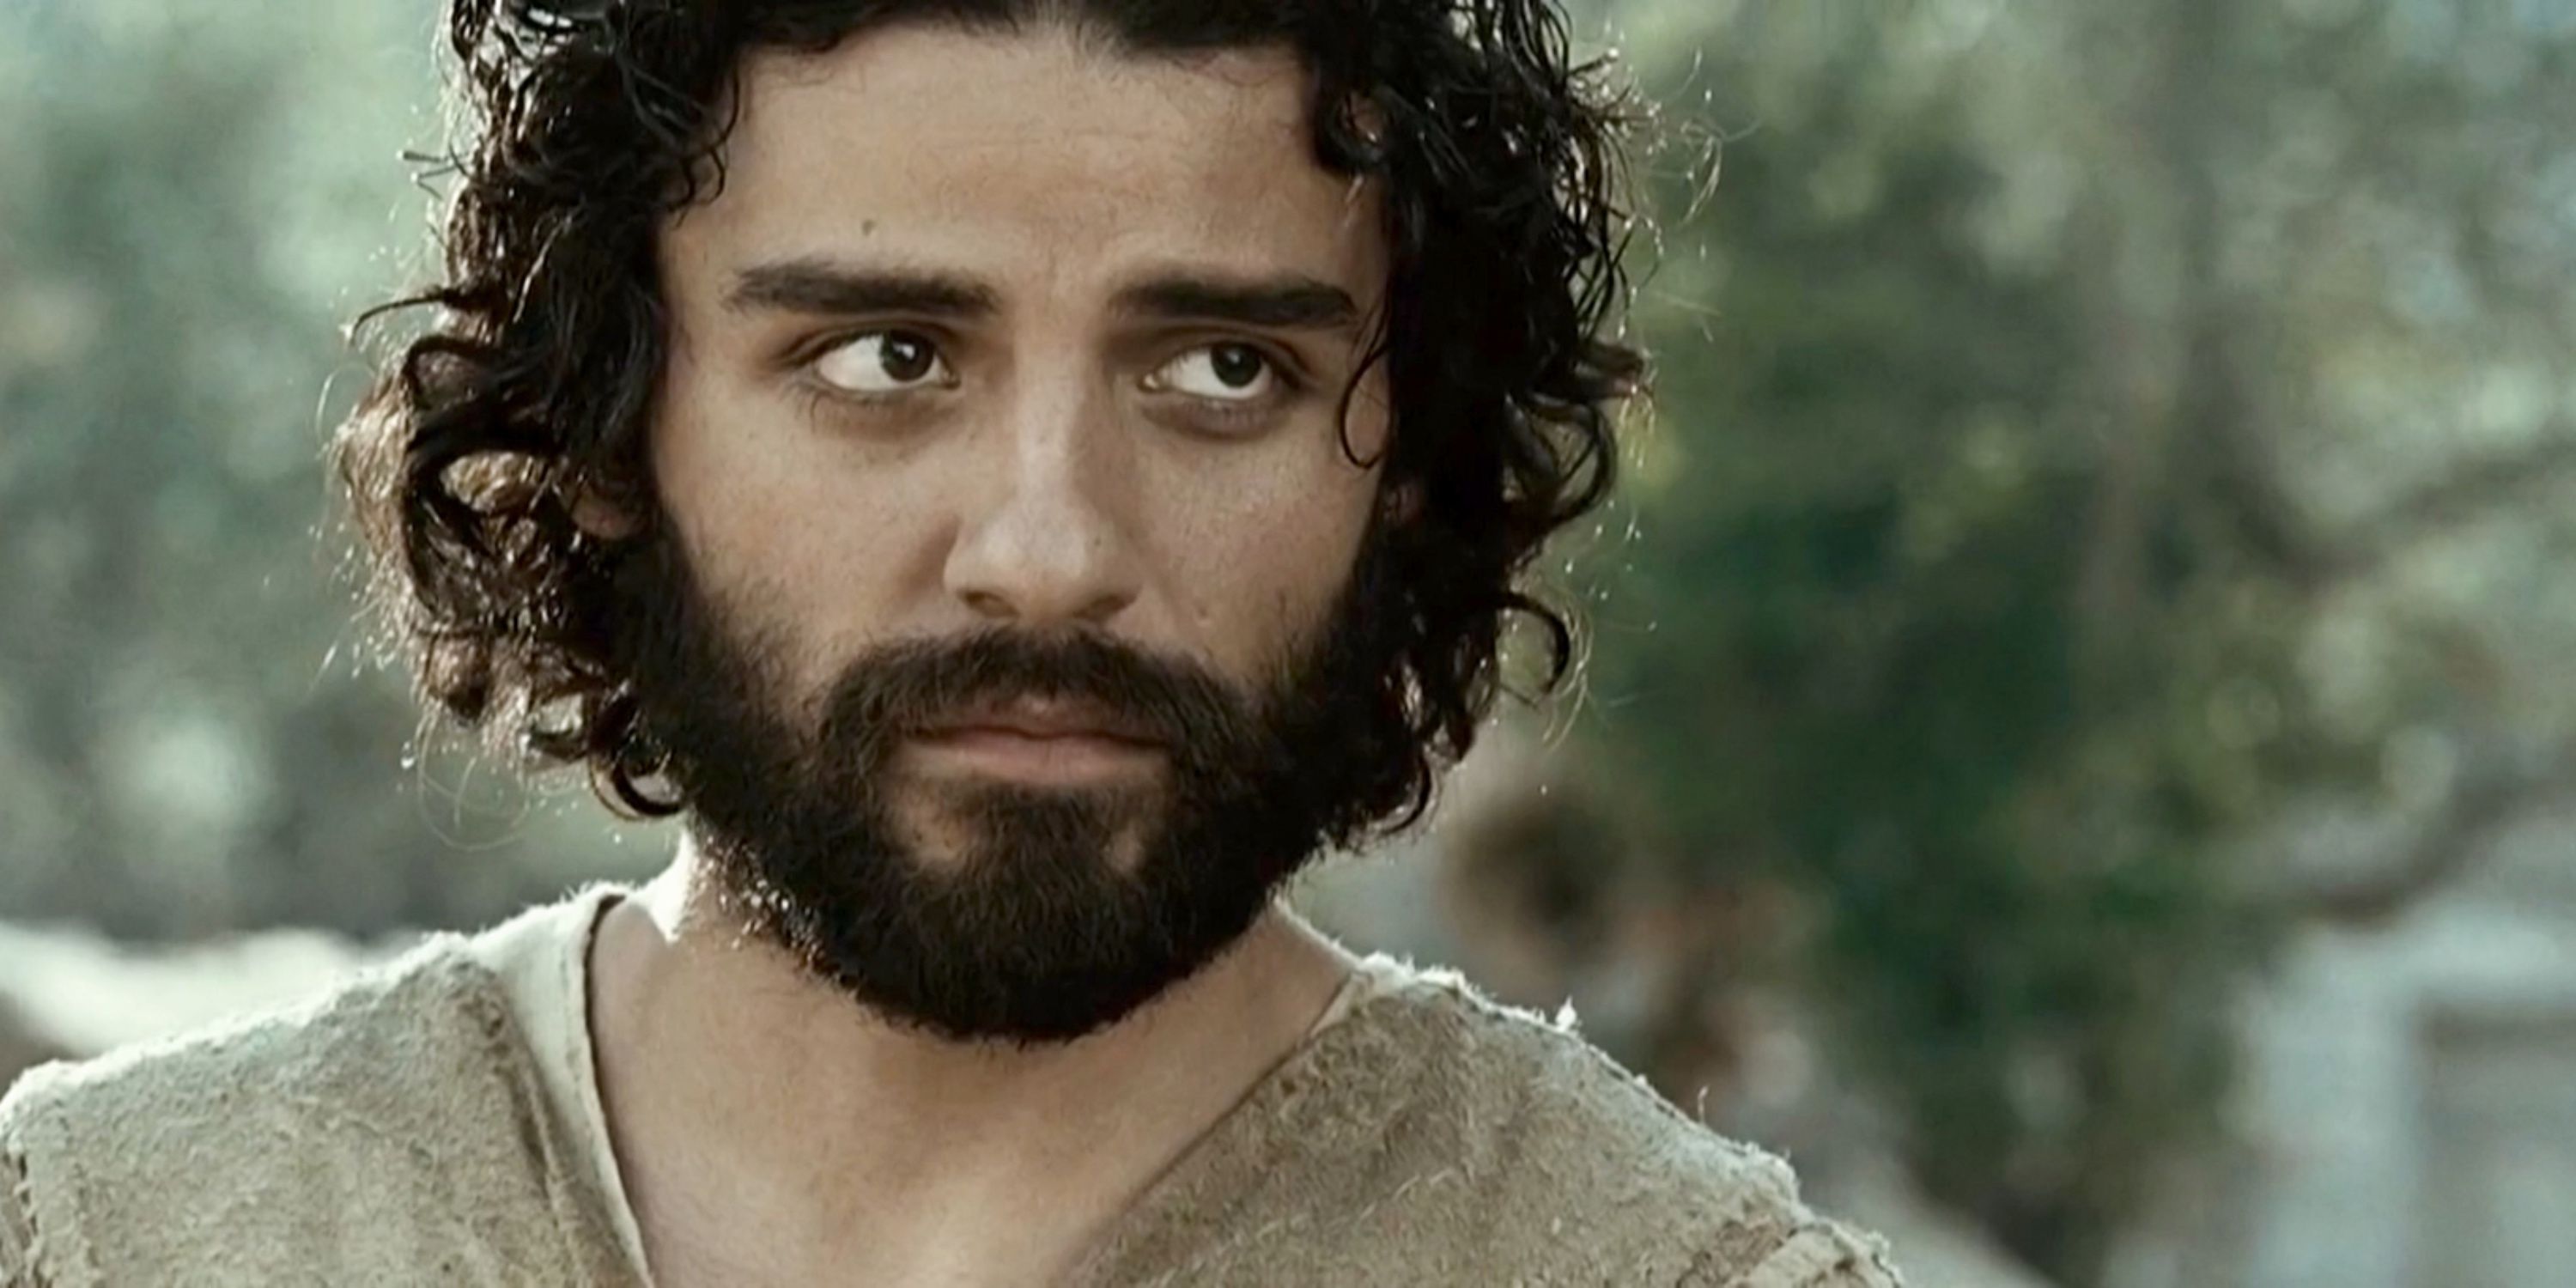 Oscar Isaac as Joseph looking intently in The nativity Story